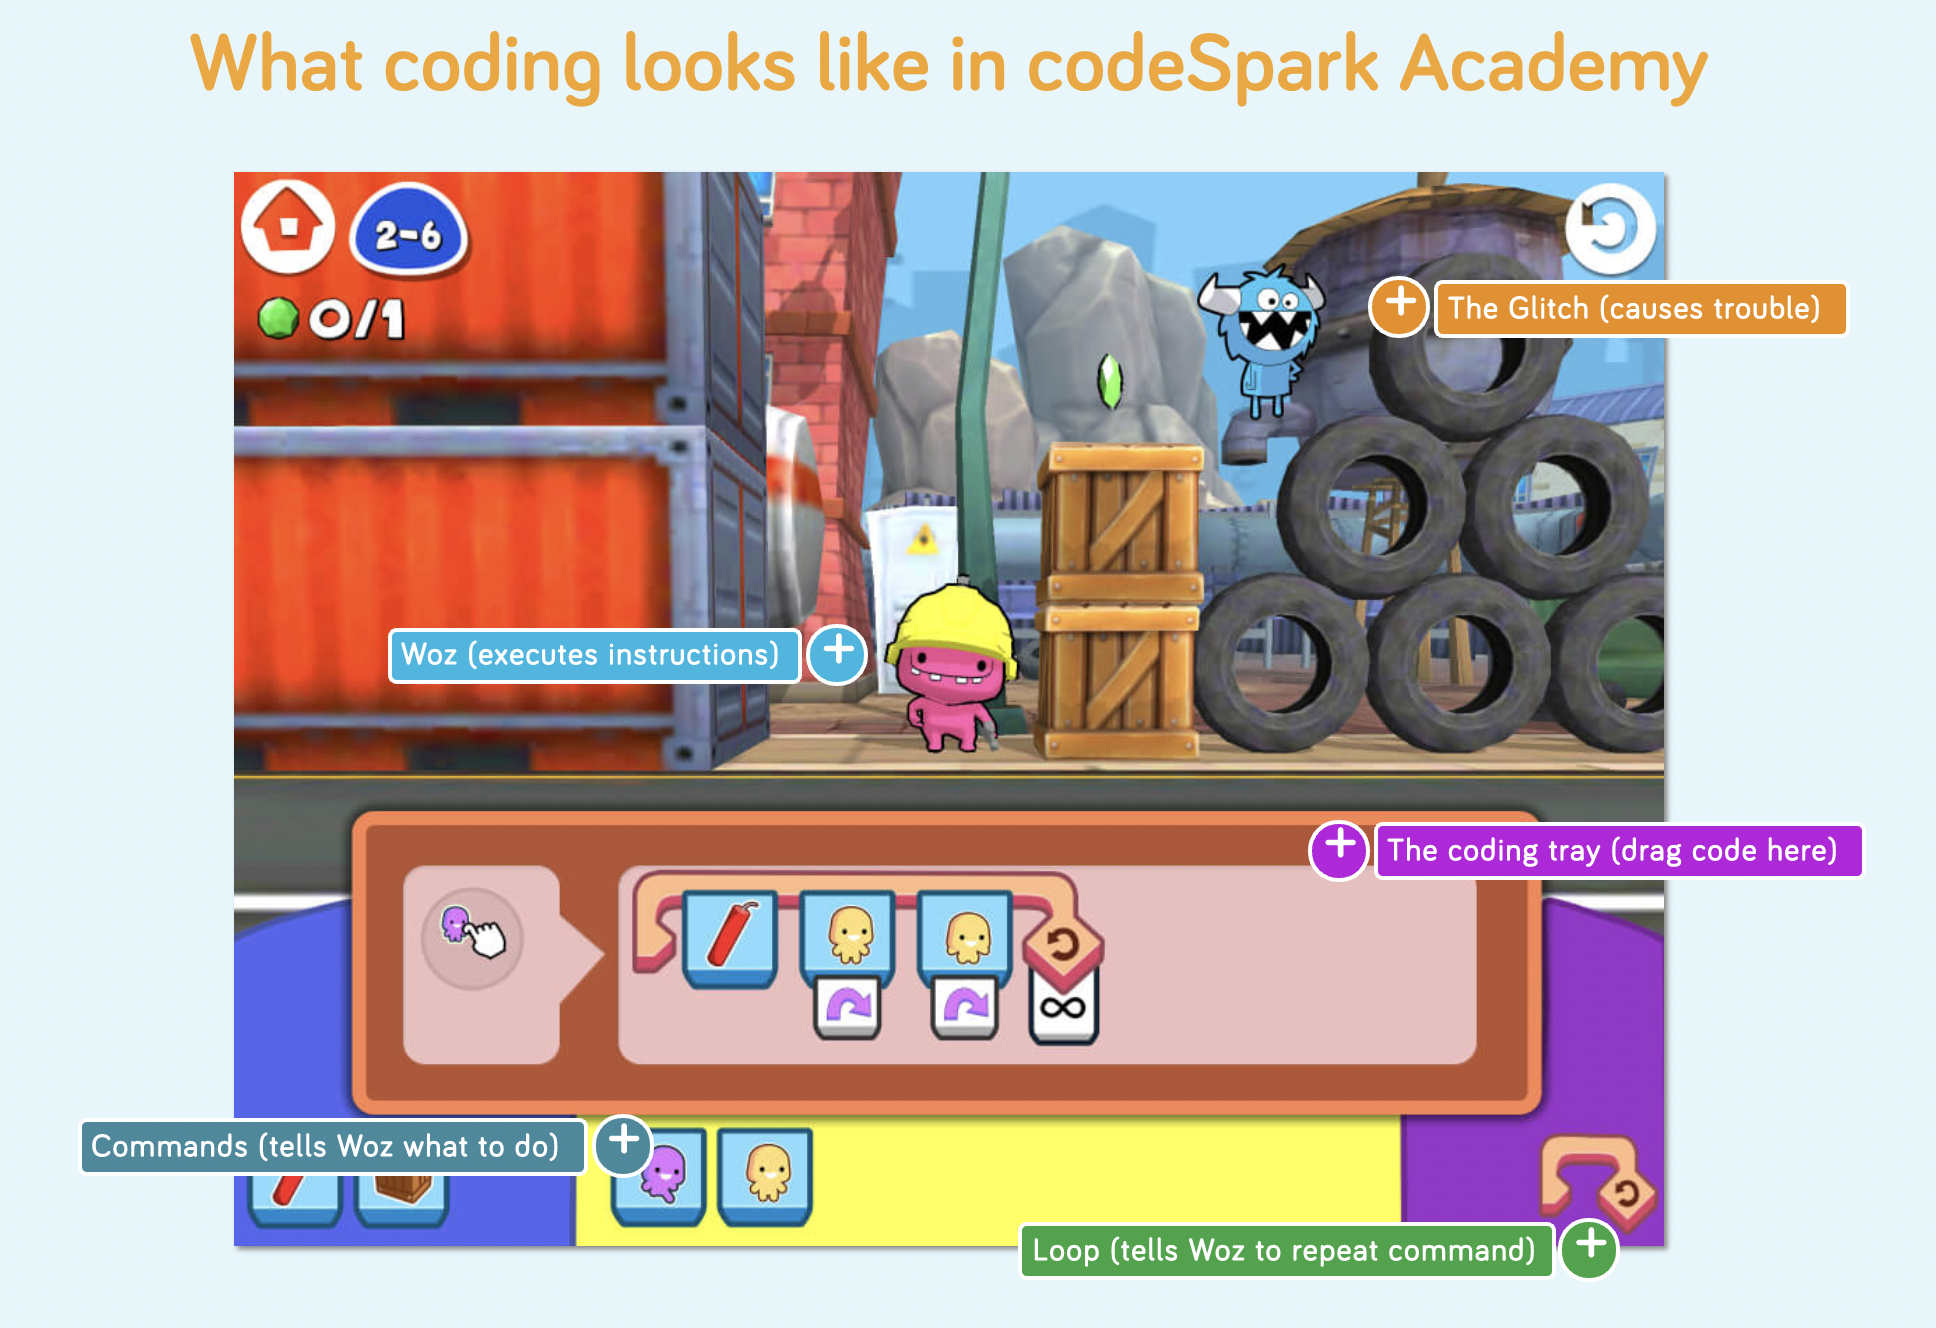 Illustration of how CodeSpark Academy teaches kids coding using games designed for learning